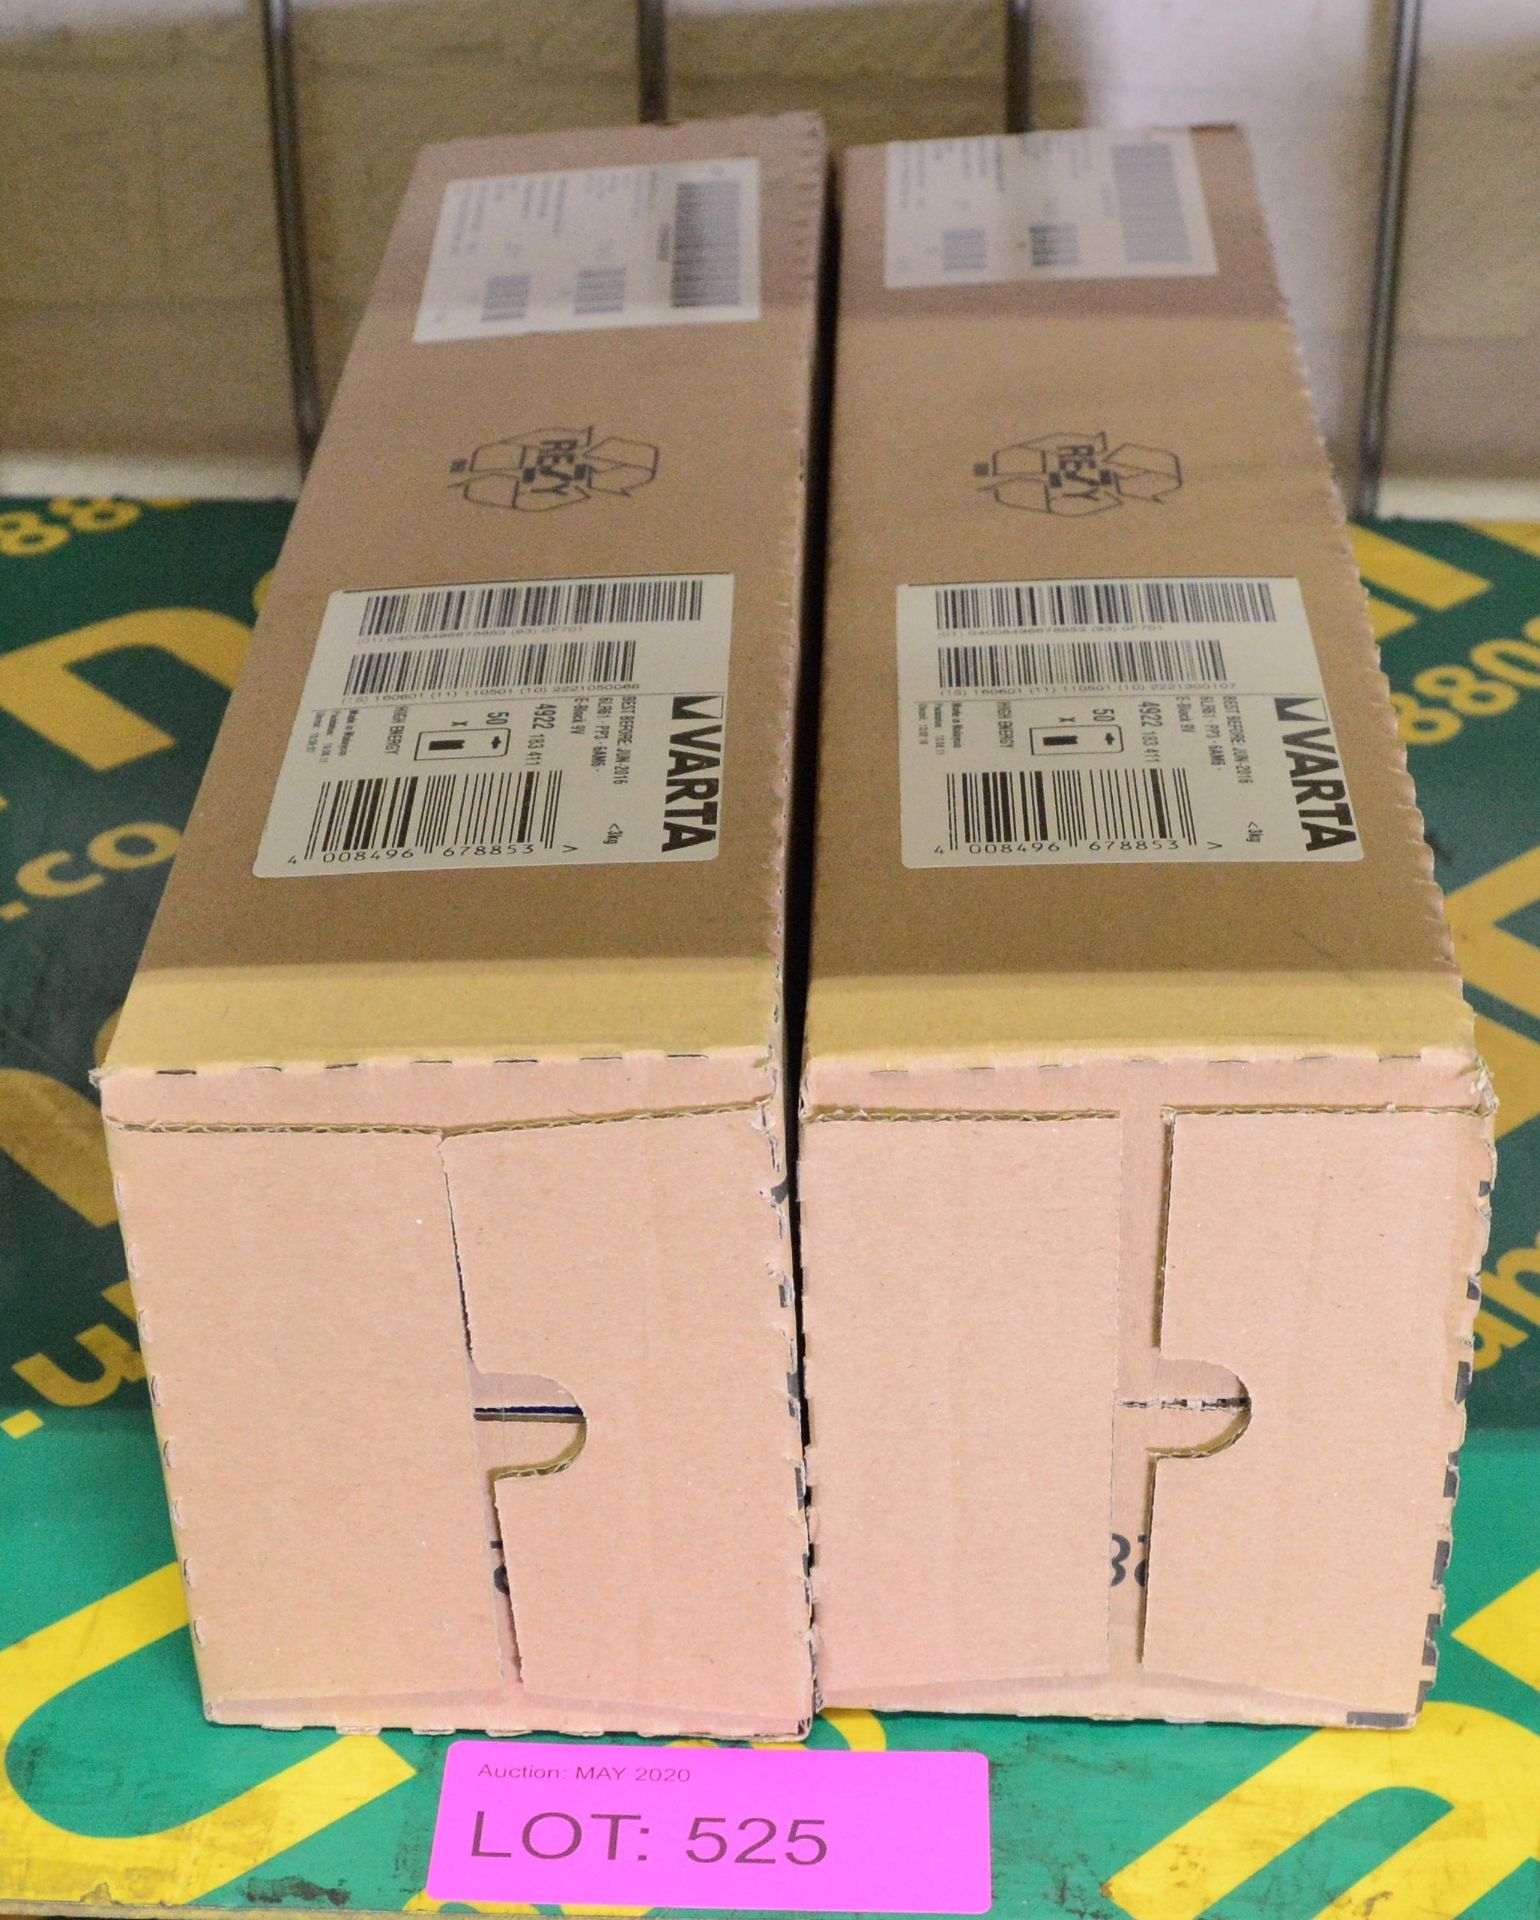 2x Boxes of Varta High Energy 9V Batteries - 50 per box - OUT OF DATE.